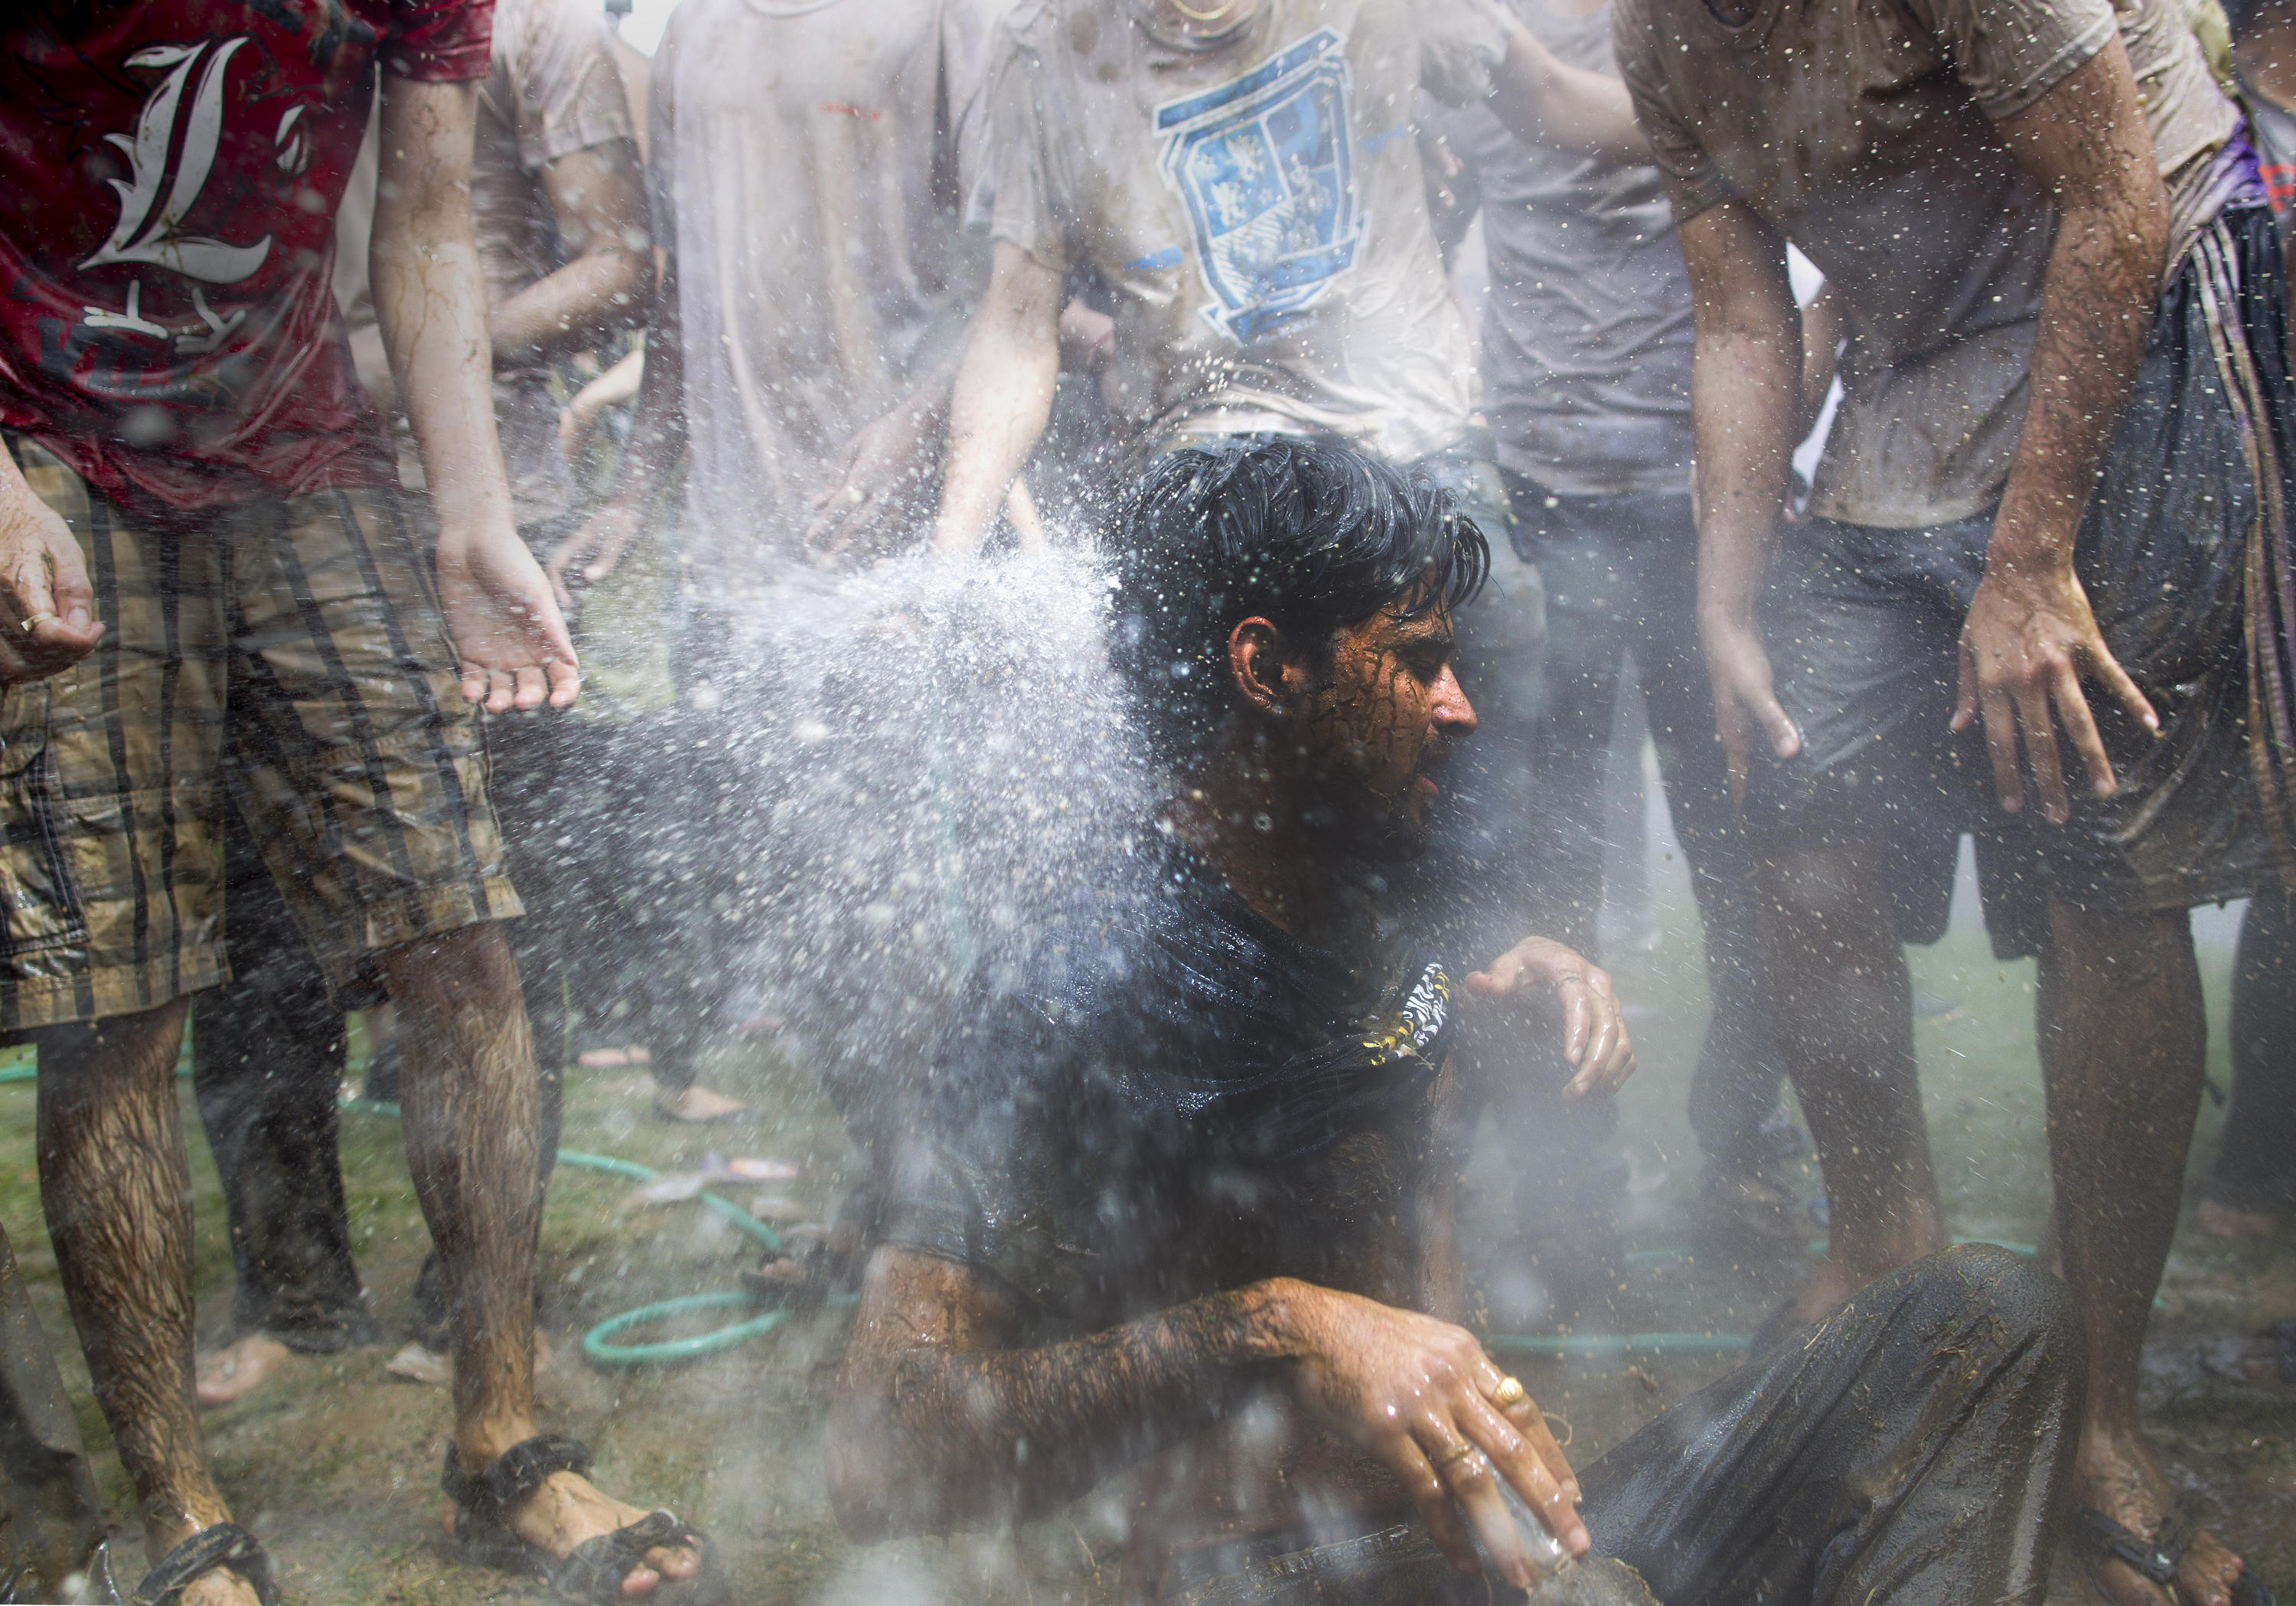 Rochester Institute of Technology student Sachin Gawande (cq) gets soaked by a garden hose during the Indian Holi Festival of Color on April 26, 2014 in Henrietta, New York.